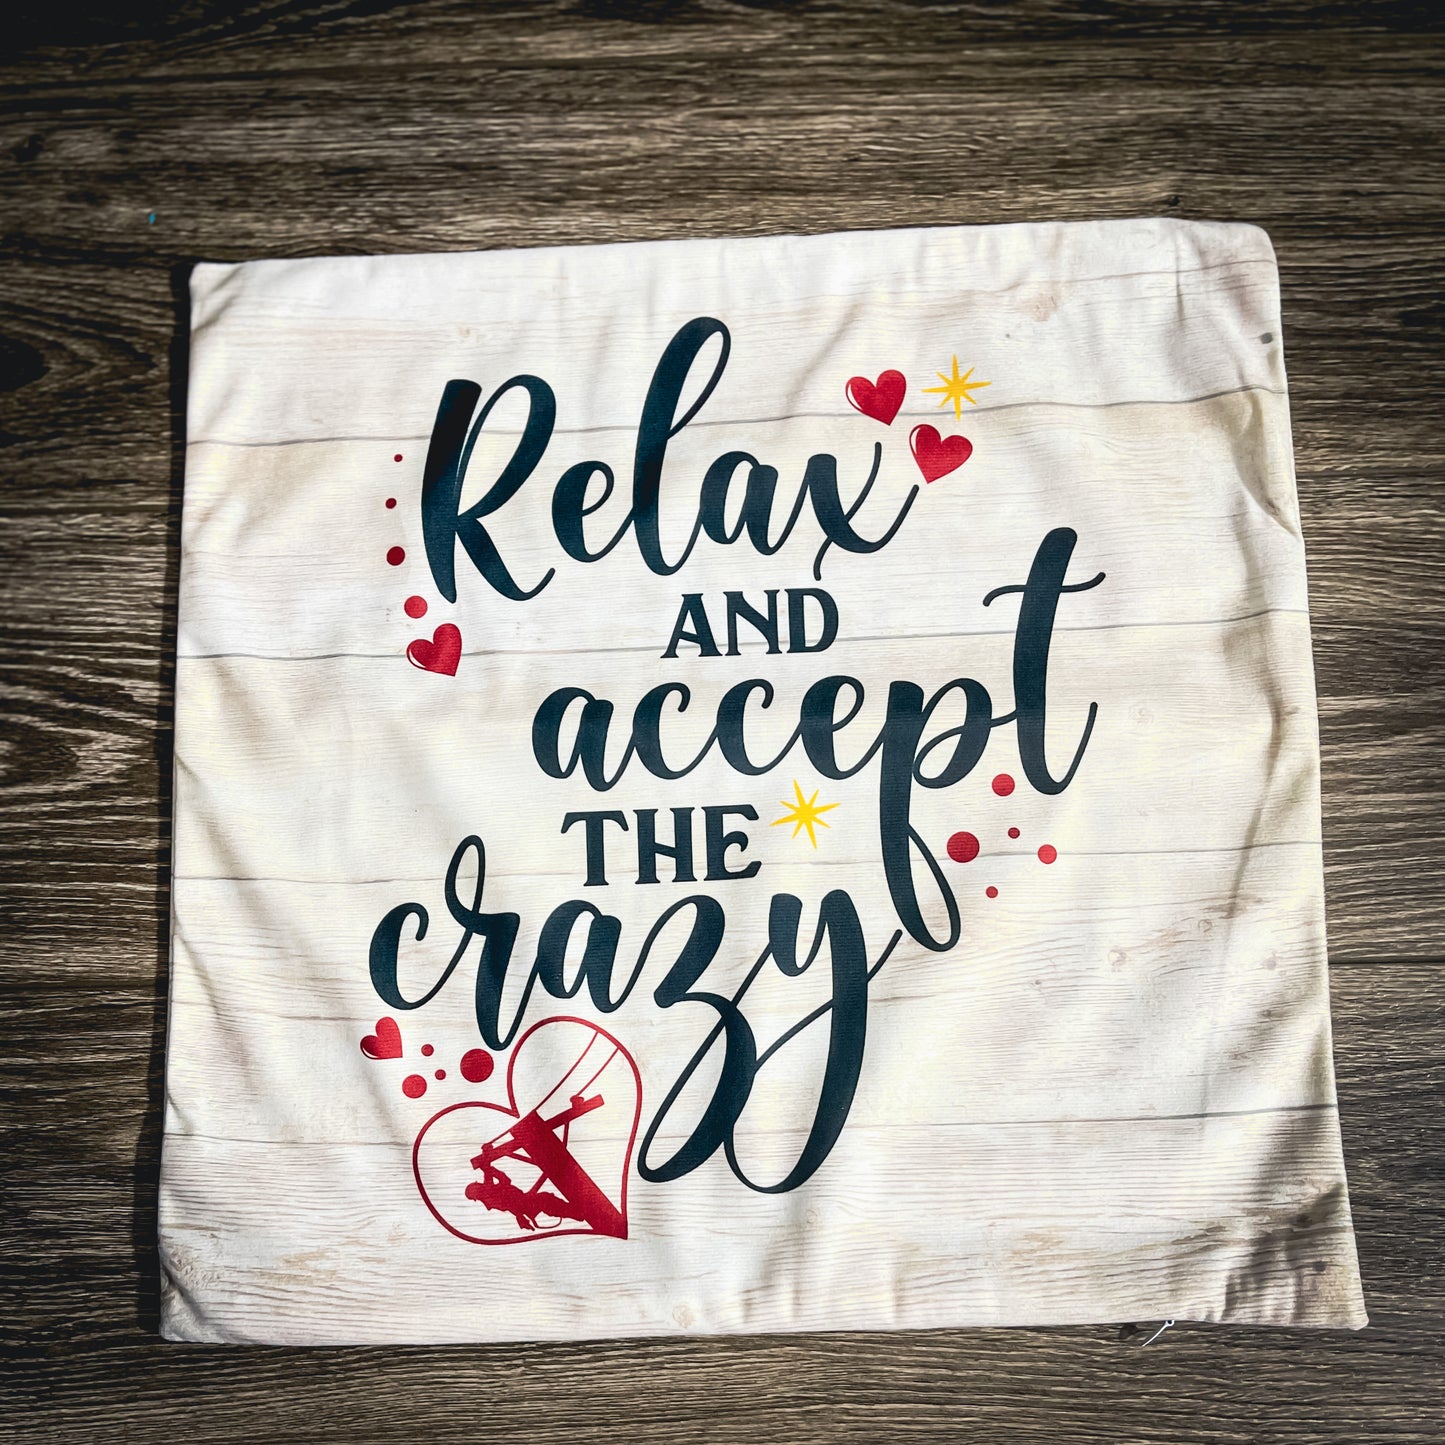 LineLady "Relax and Accept the Crazy" Throw Pillow Cover